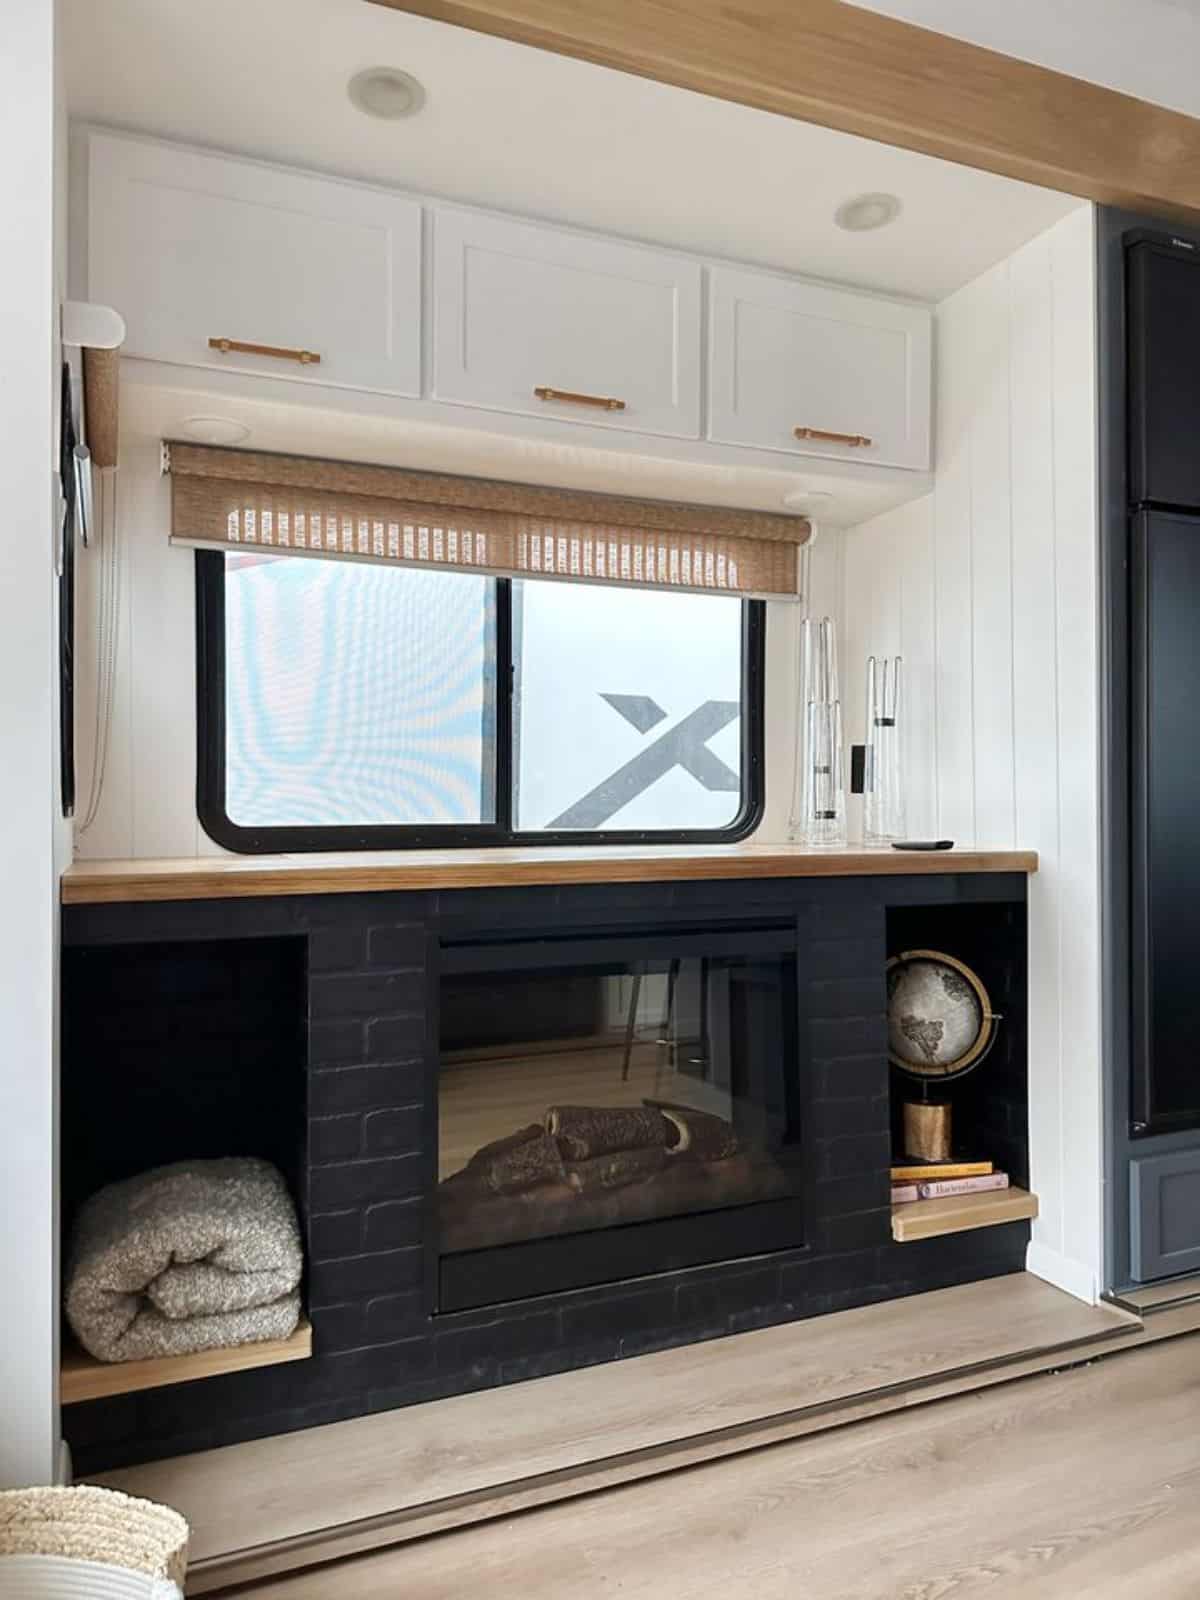 storage cabinets with fireplace in living area